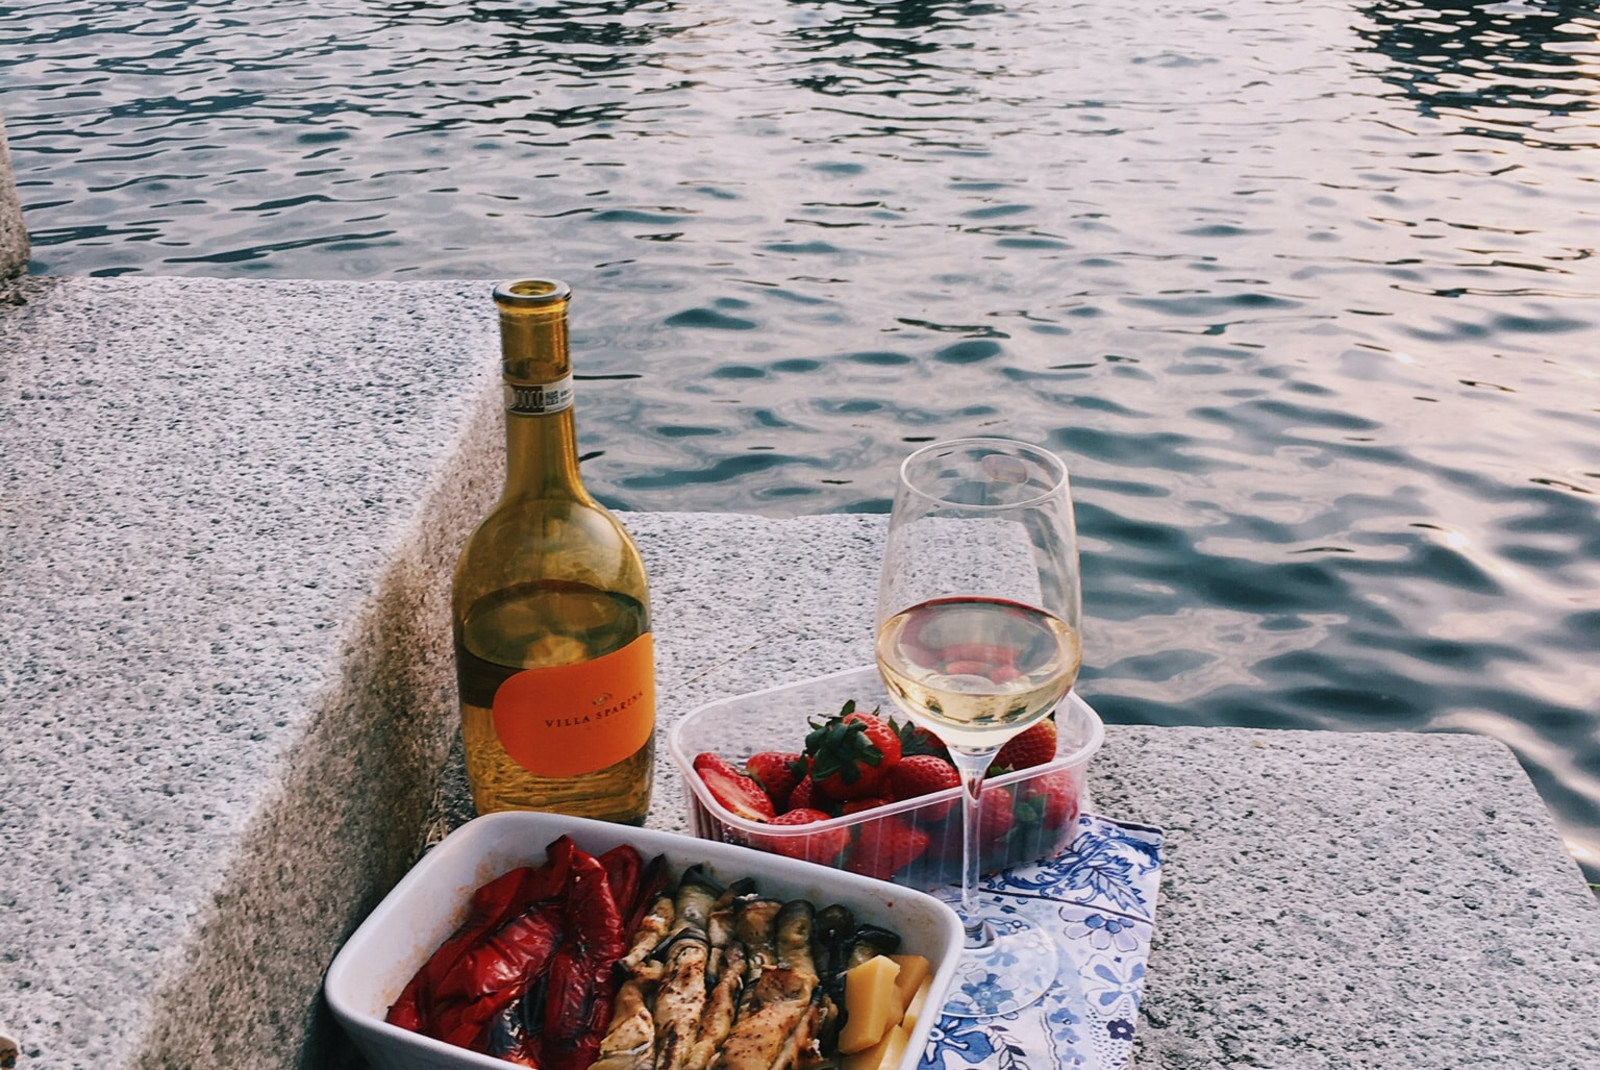 Dishes of bread and vegetables with a wine glass and bottle overlooking the water in Italy